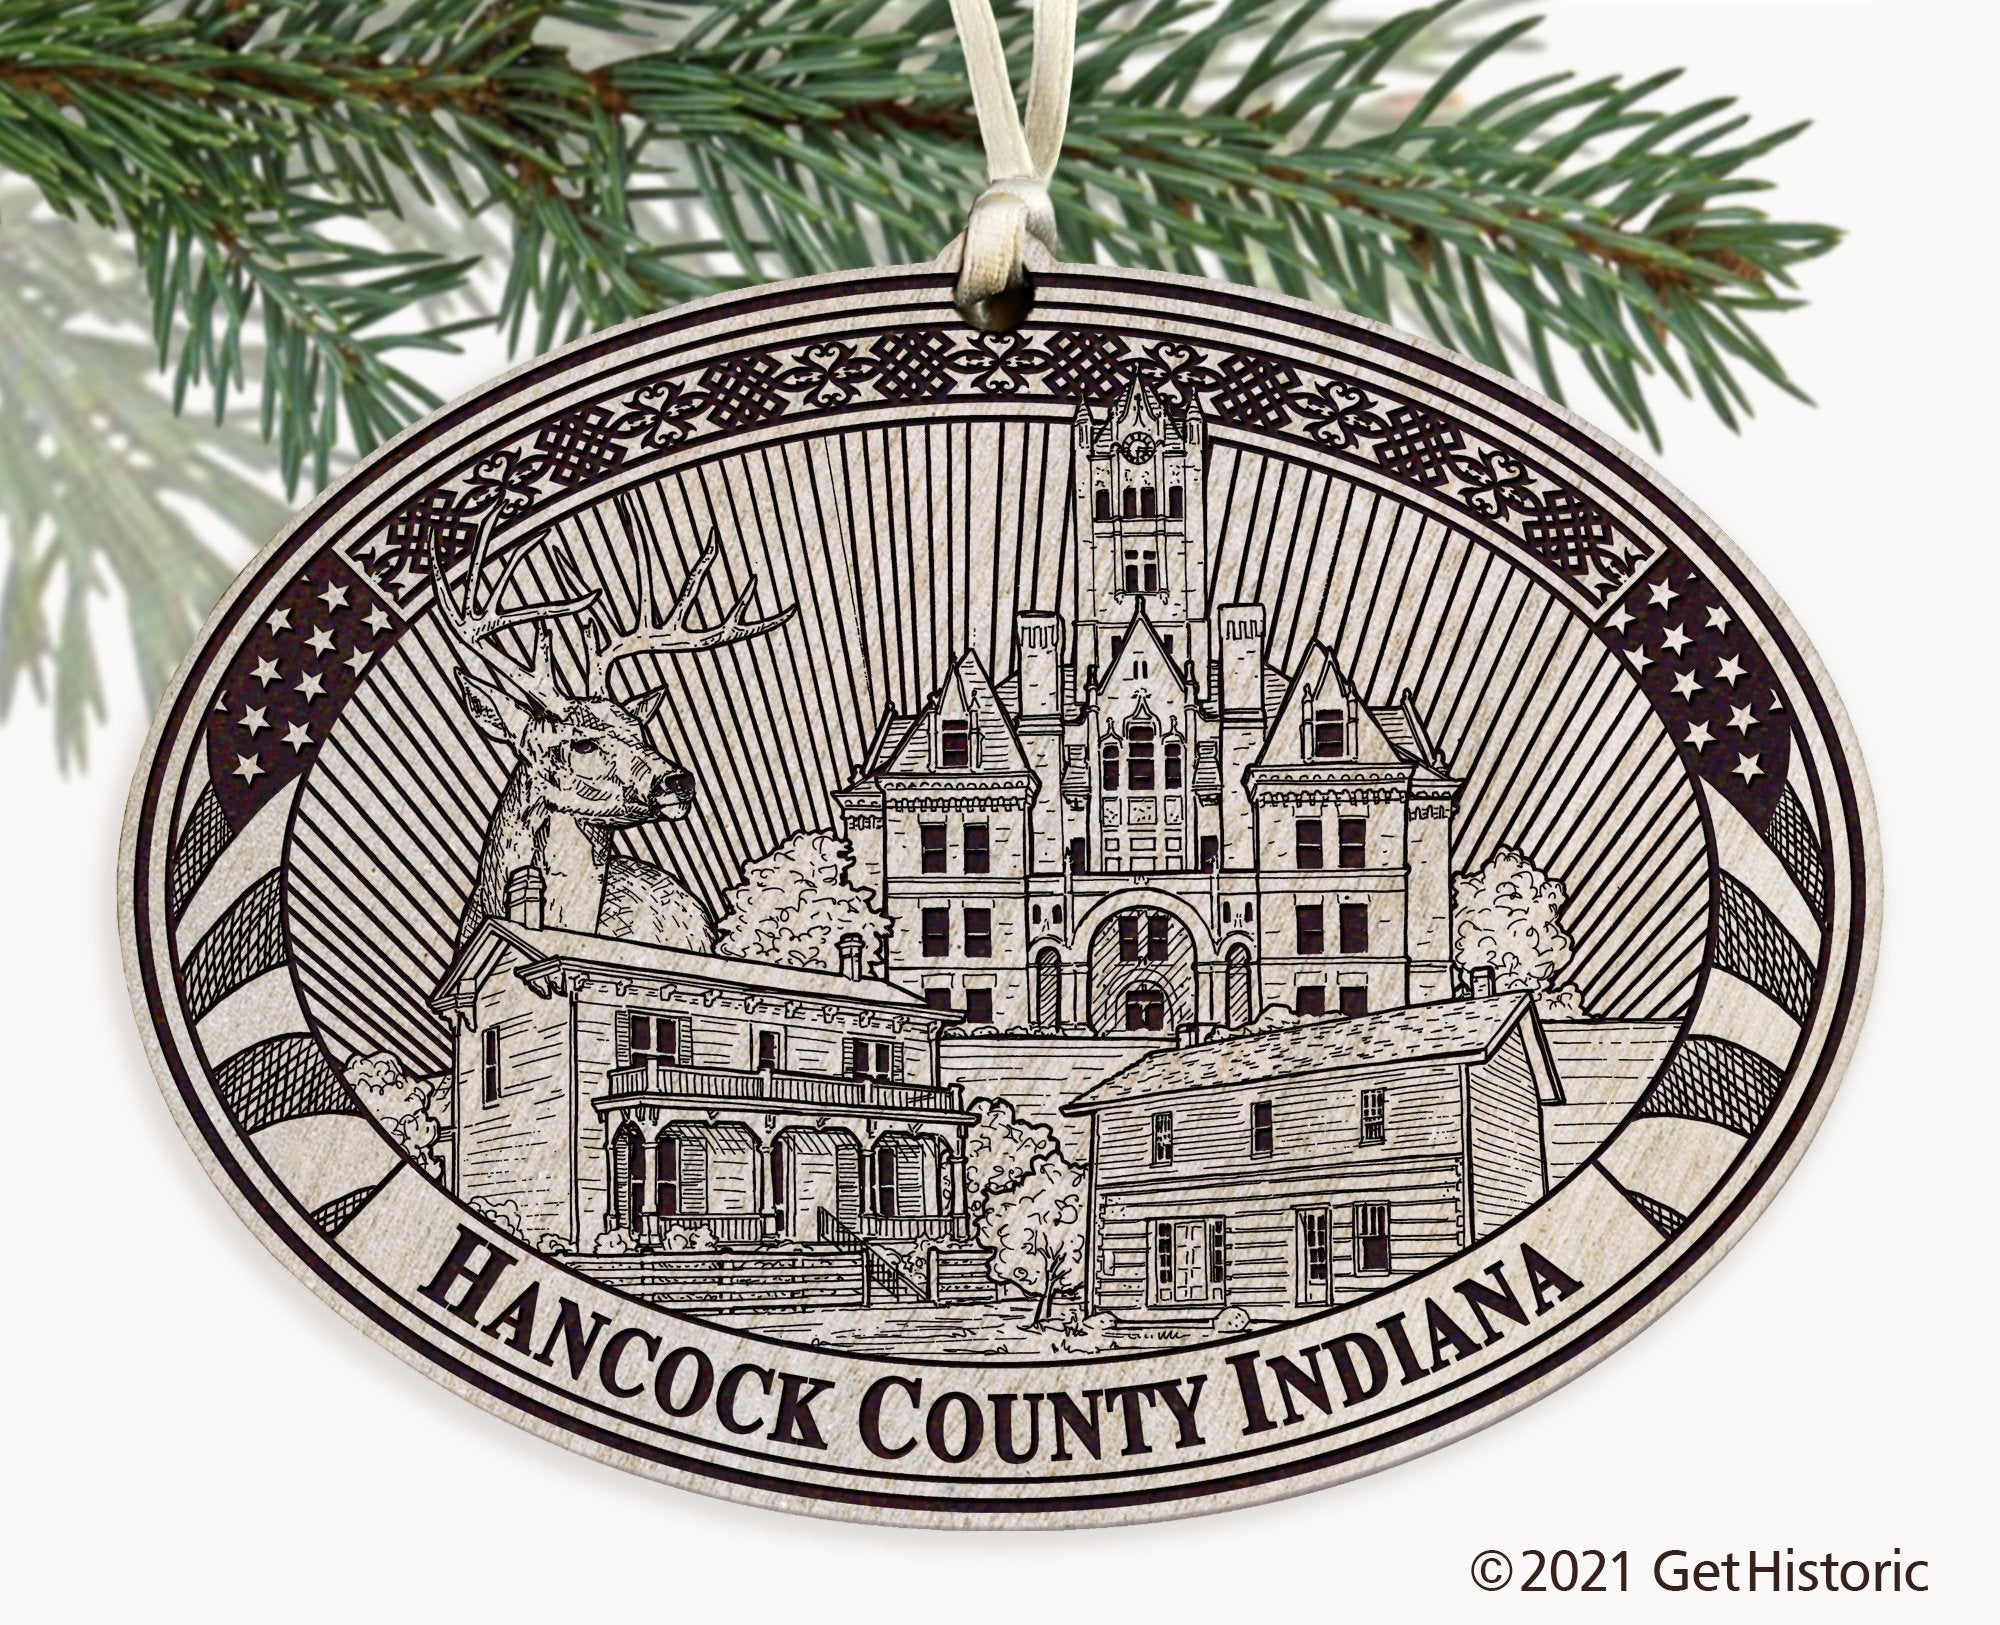 Hancock County Indiana Engraved Ornament